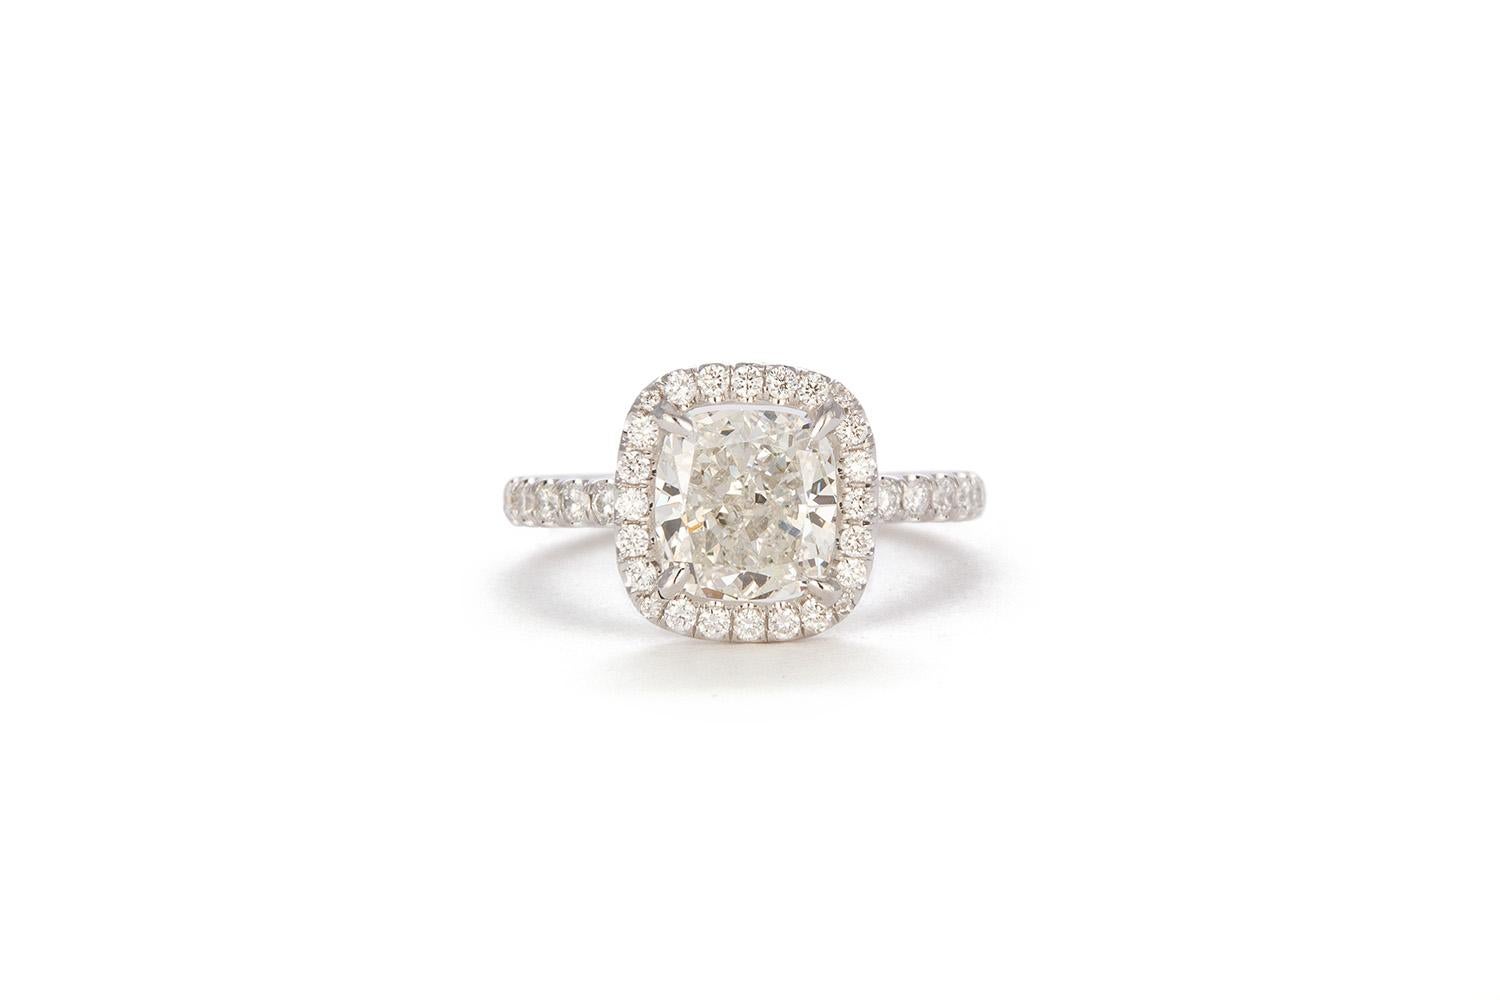 We are very pleased to present this remarkable 18k White Gold GIA Certified Cushion Cut Diamond Halo Engagement Ring. This stunning ring features a GIA Certified 2.01ct G/SI1 Cushion Cut Diamond set in a 18k white gold halo ring accented by 0.82ctw